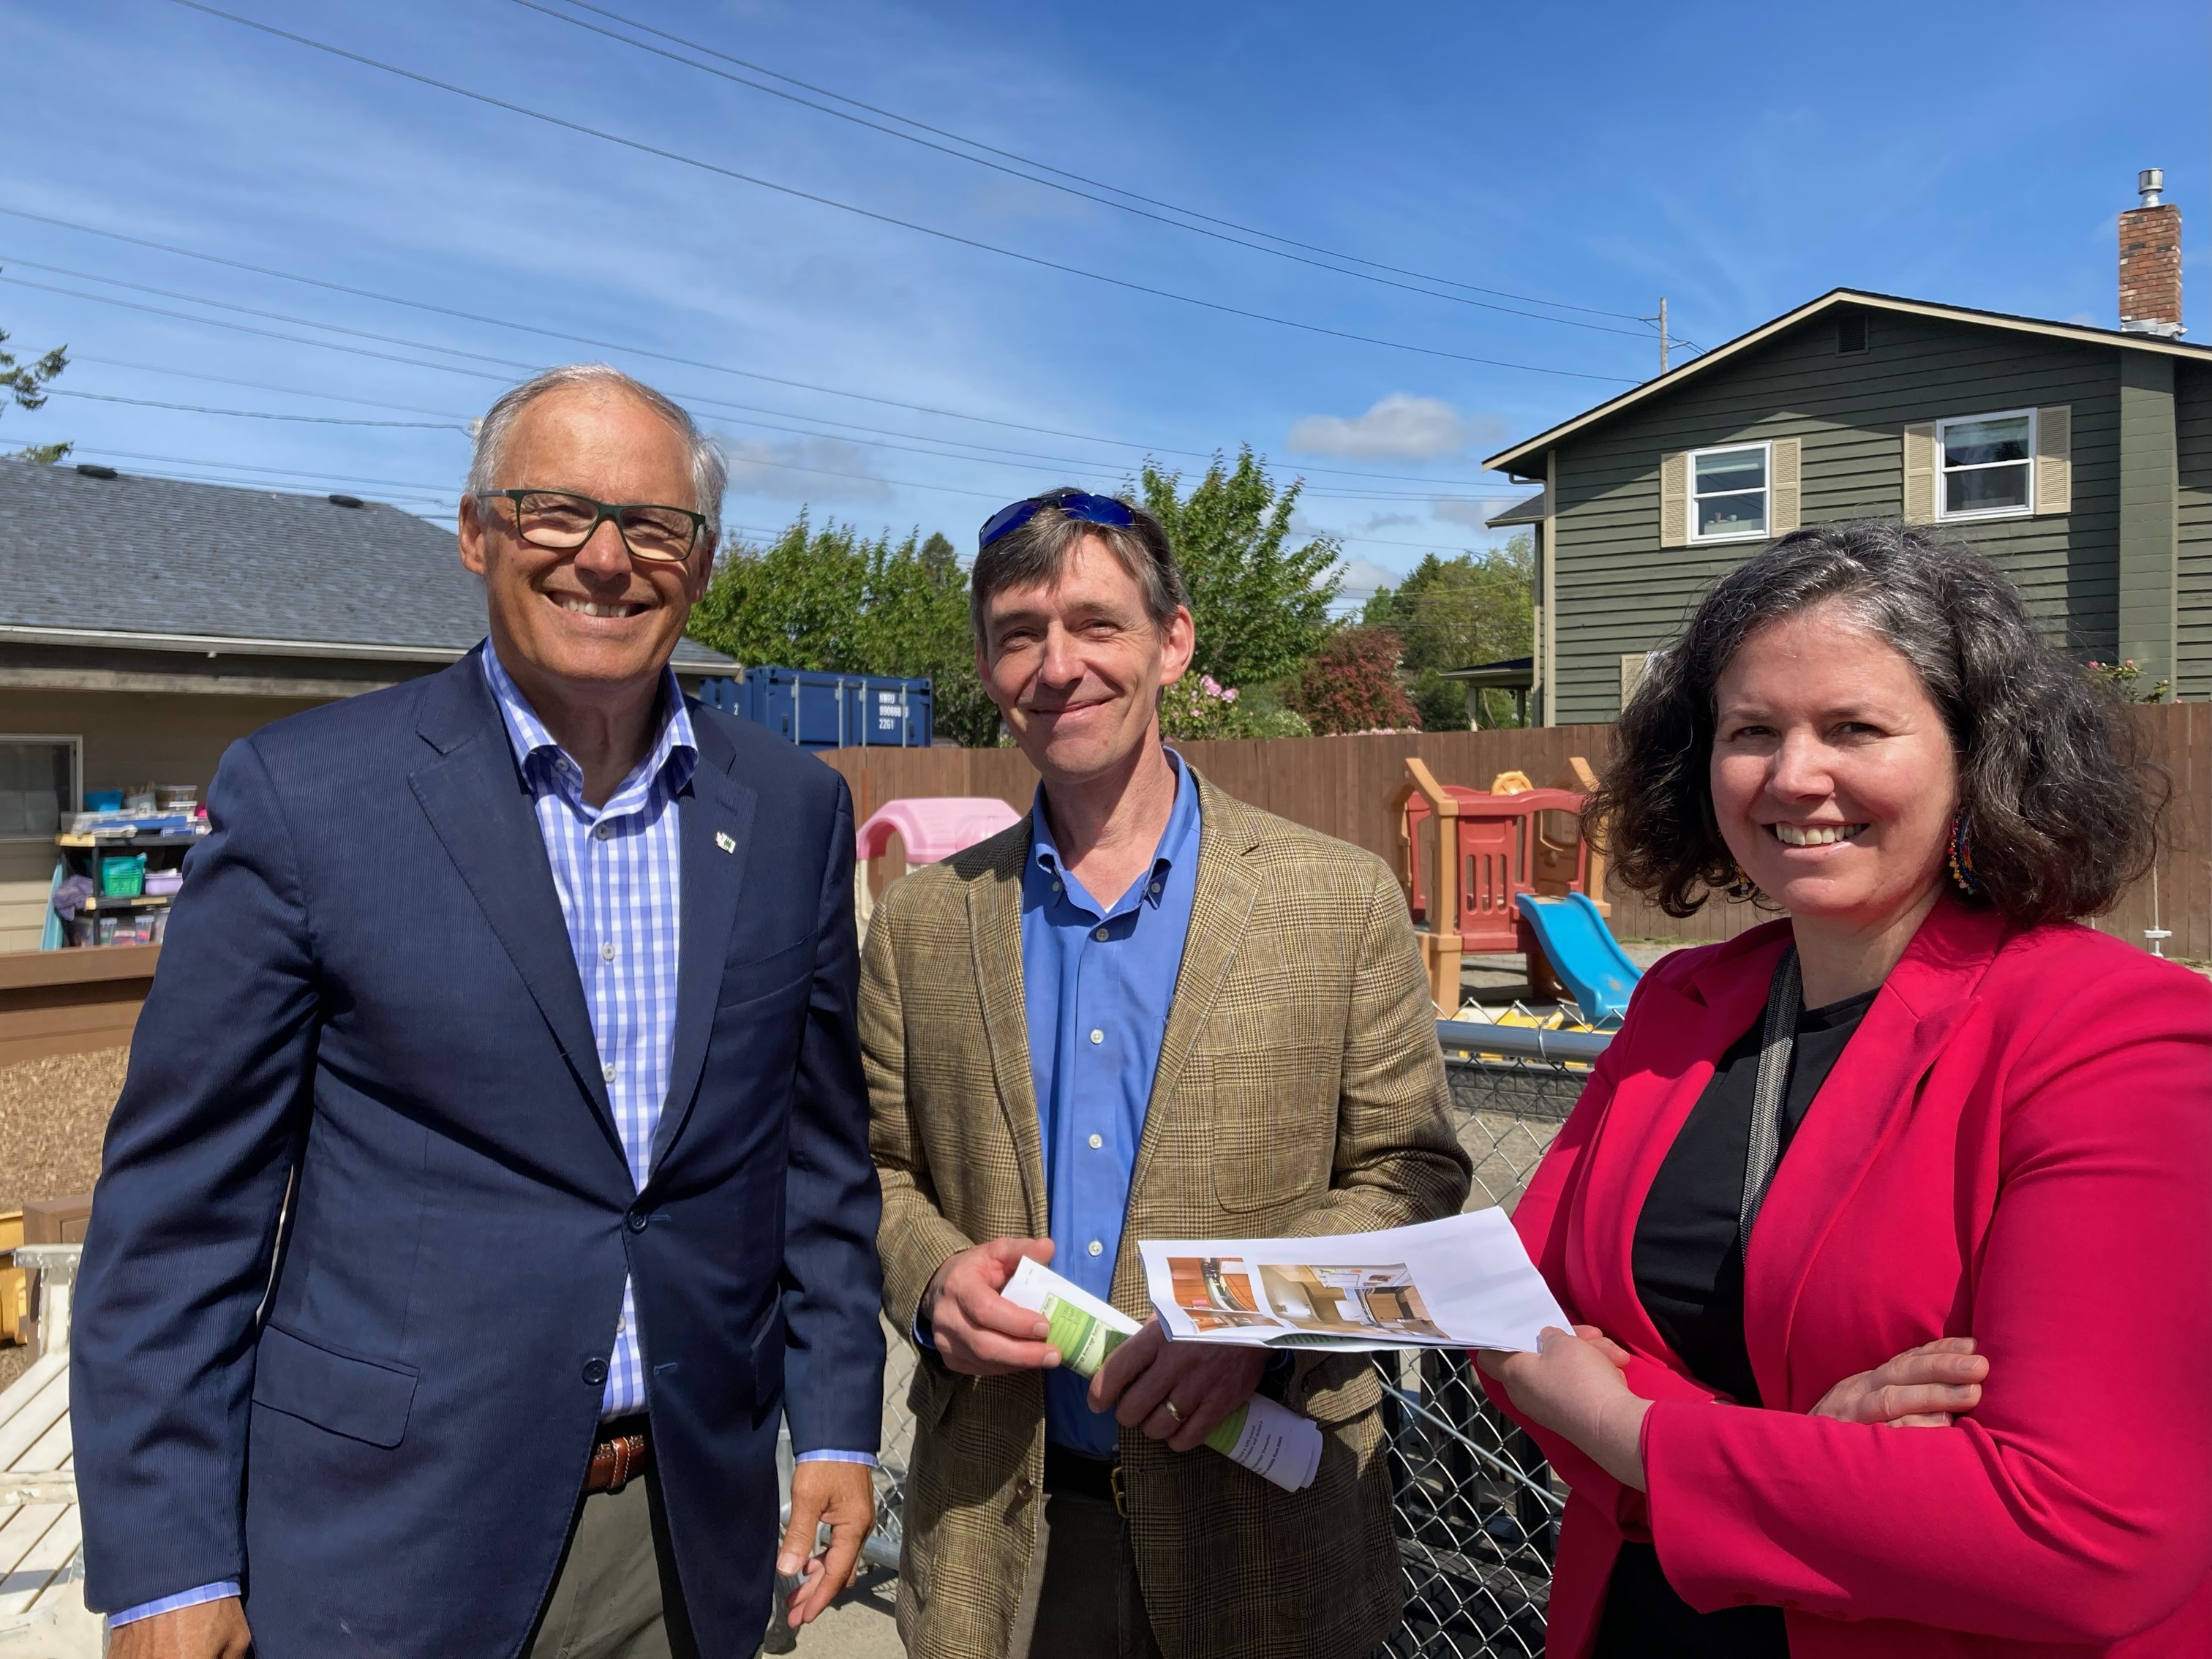 From left to right: Governor Jay Inslee, IES Director Darrin Magee, and IES faculty and Washington Senator Sharon Shwemake. The group is standing in a small playground and there are low buildings in the background.